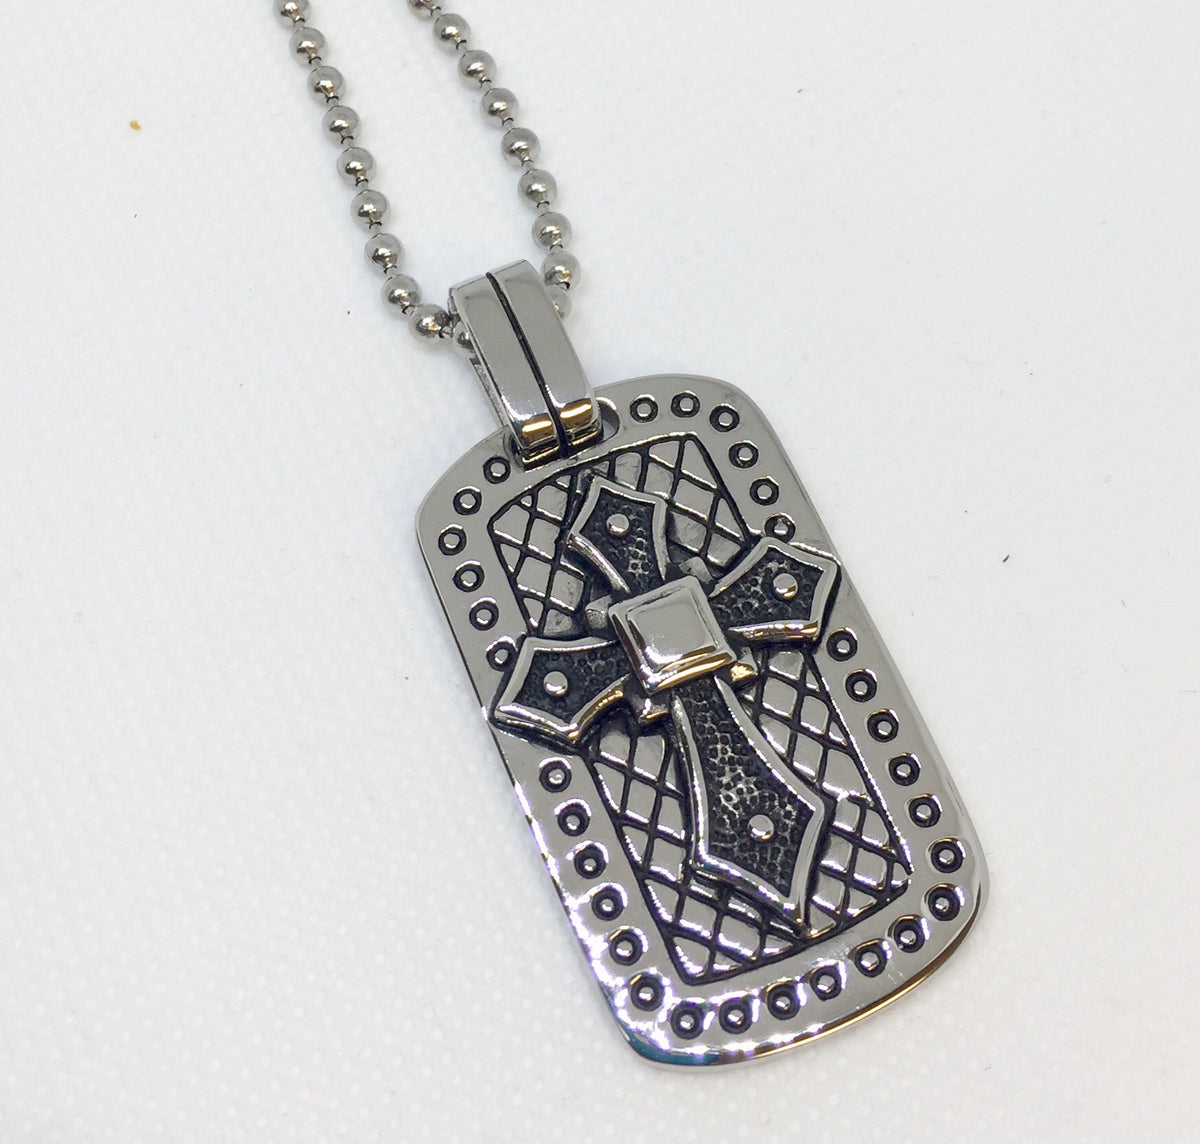 Gunmetal Stainless Steel Dog Tag & Cross Cable Chain Necklace